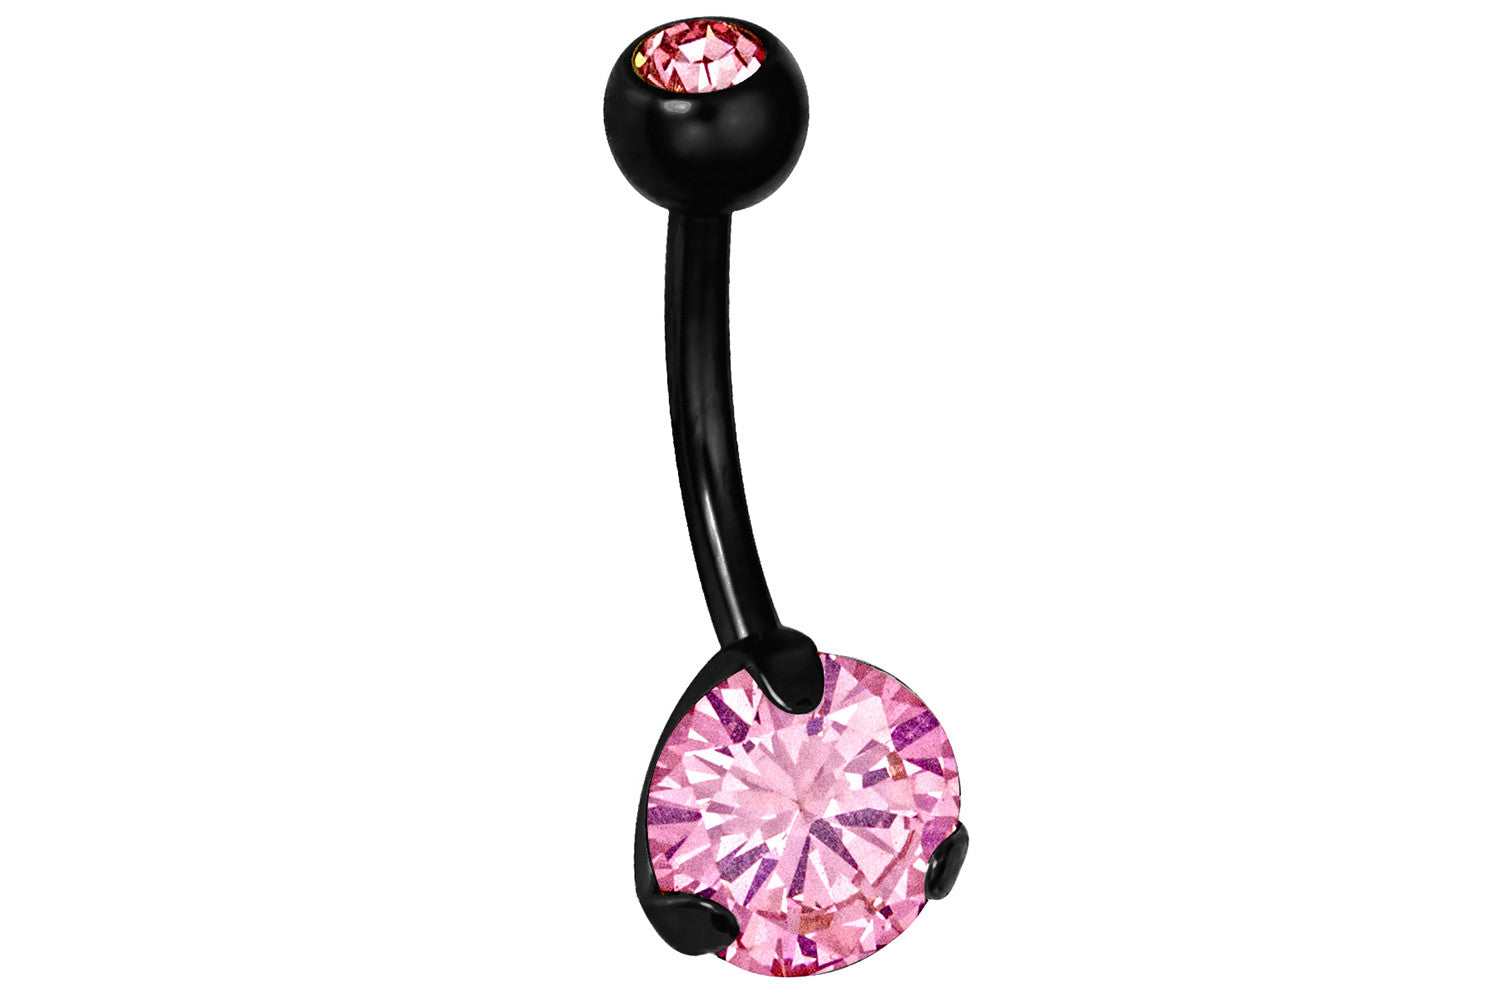 Our double jeweled belly button ring is made with black Titanium IP plating over surgical grade 316L stainless steel. IP plating (Ion Plating) is a safe and permanent surface refinishing process that creates a brighter, harder and more durable piece of jewelry. This body jewelry features pink Cubic Zirconia simulated diamond crystals. This 14 gauge 3/8" belly ring is hypoallergenic and nickel free.